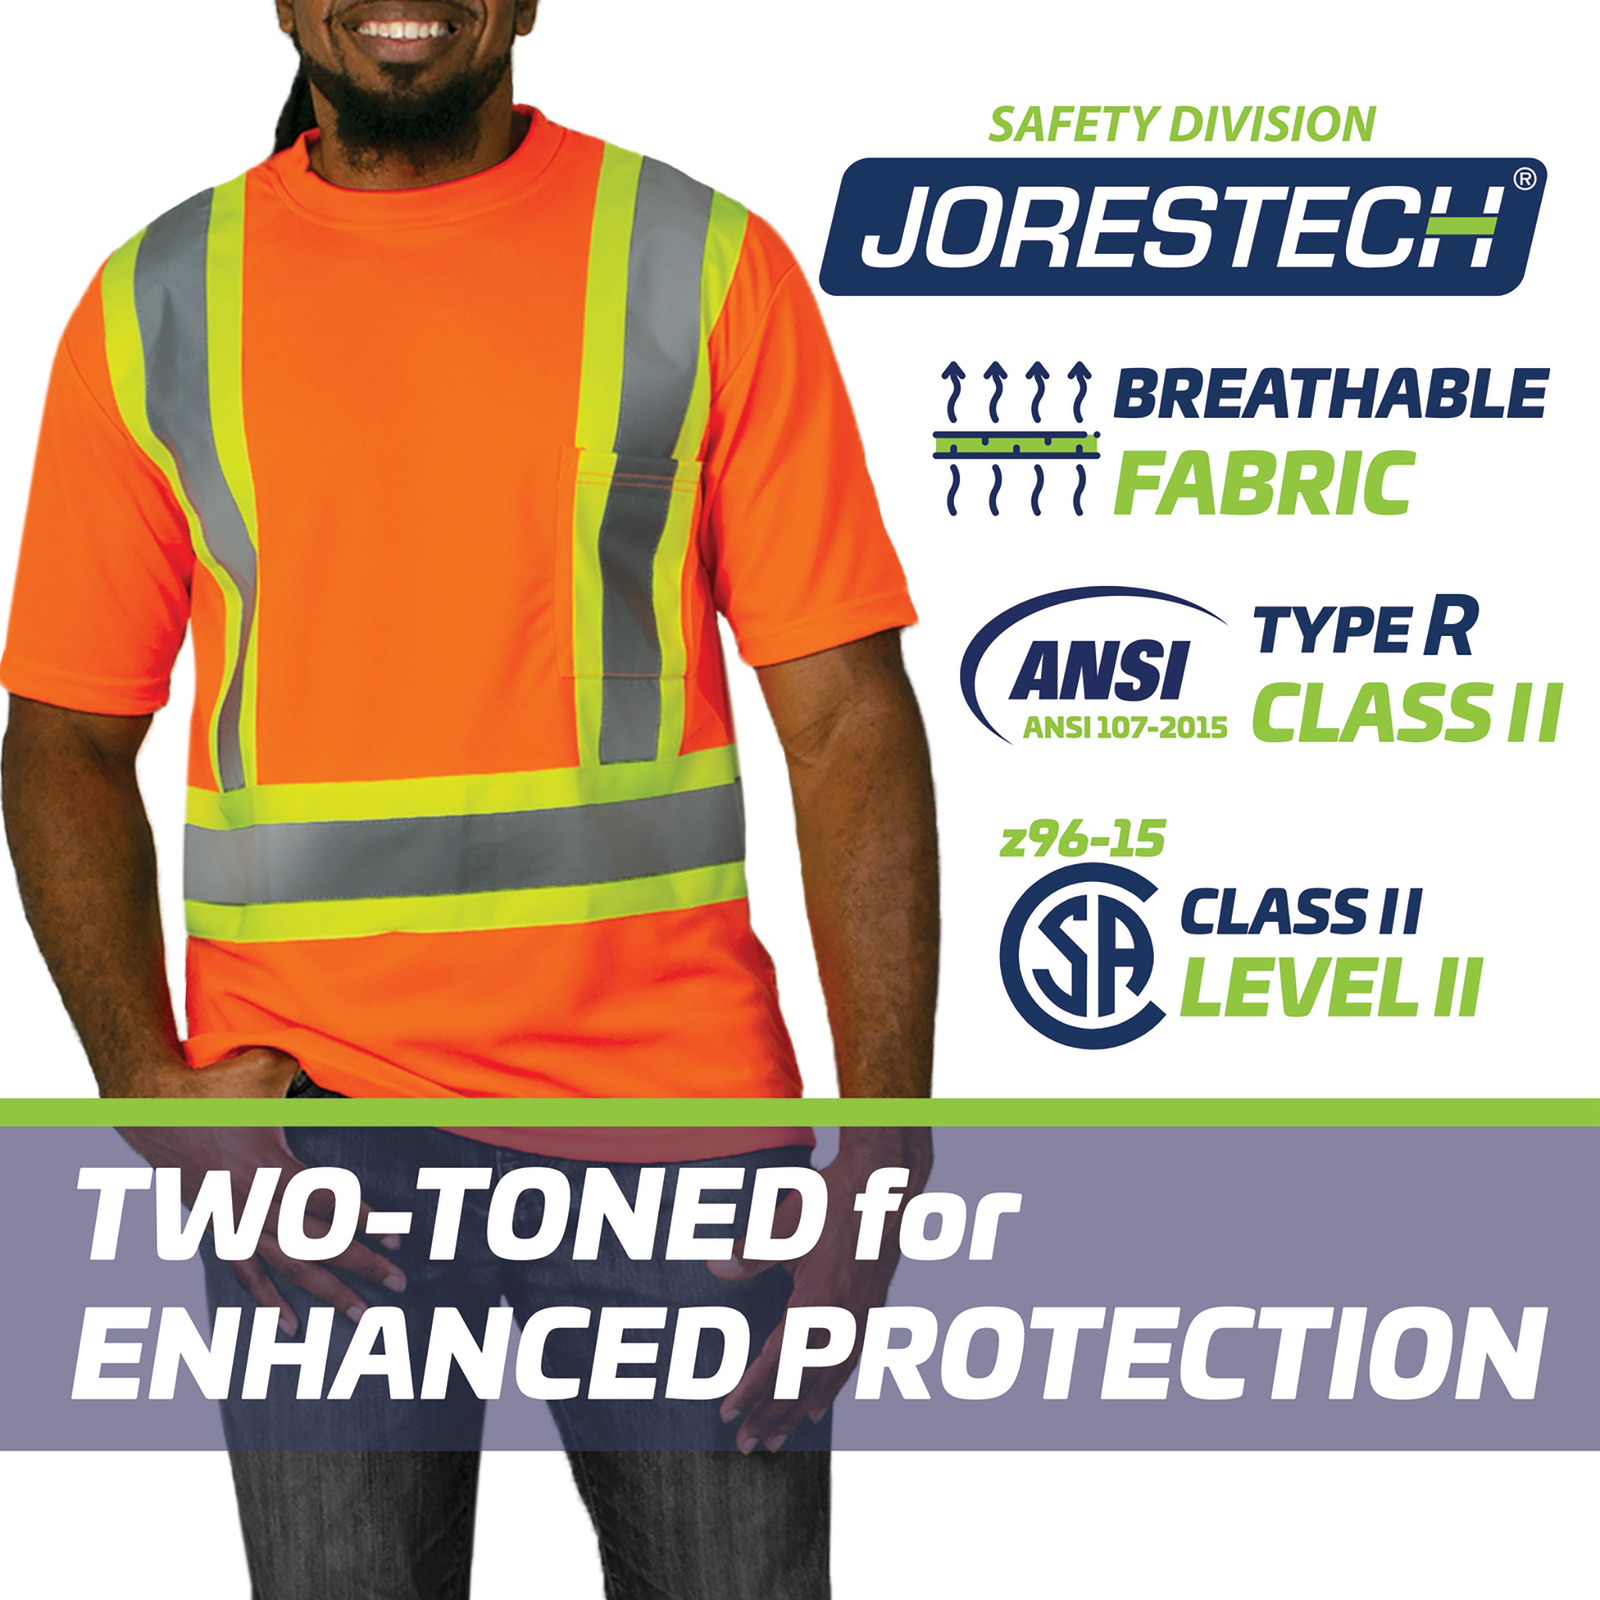 A man wearing a orange and yellow strips Reflective safety shirt. Icons with text read: Breathable fabric, ANSI Type O, Class I. SA Class I Level II. Two toned for enhanced protection.